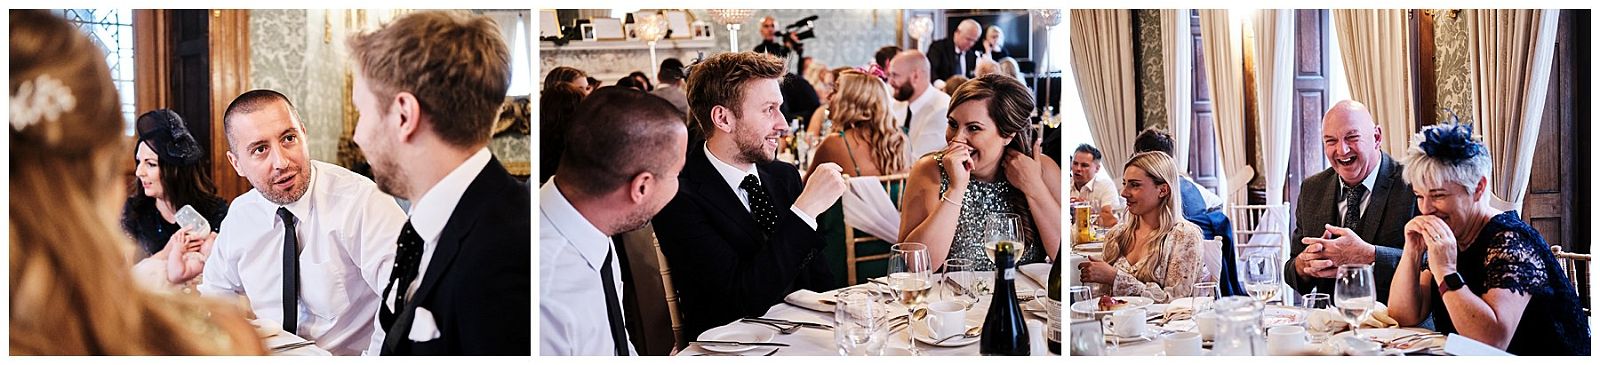 Natural candid photos capturing the guests relaxing and having fun during the wedding breakfast at Hawkstone Hall in Shrewsbury by Documentary Wedding Photographer Stuart James